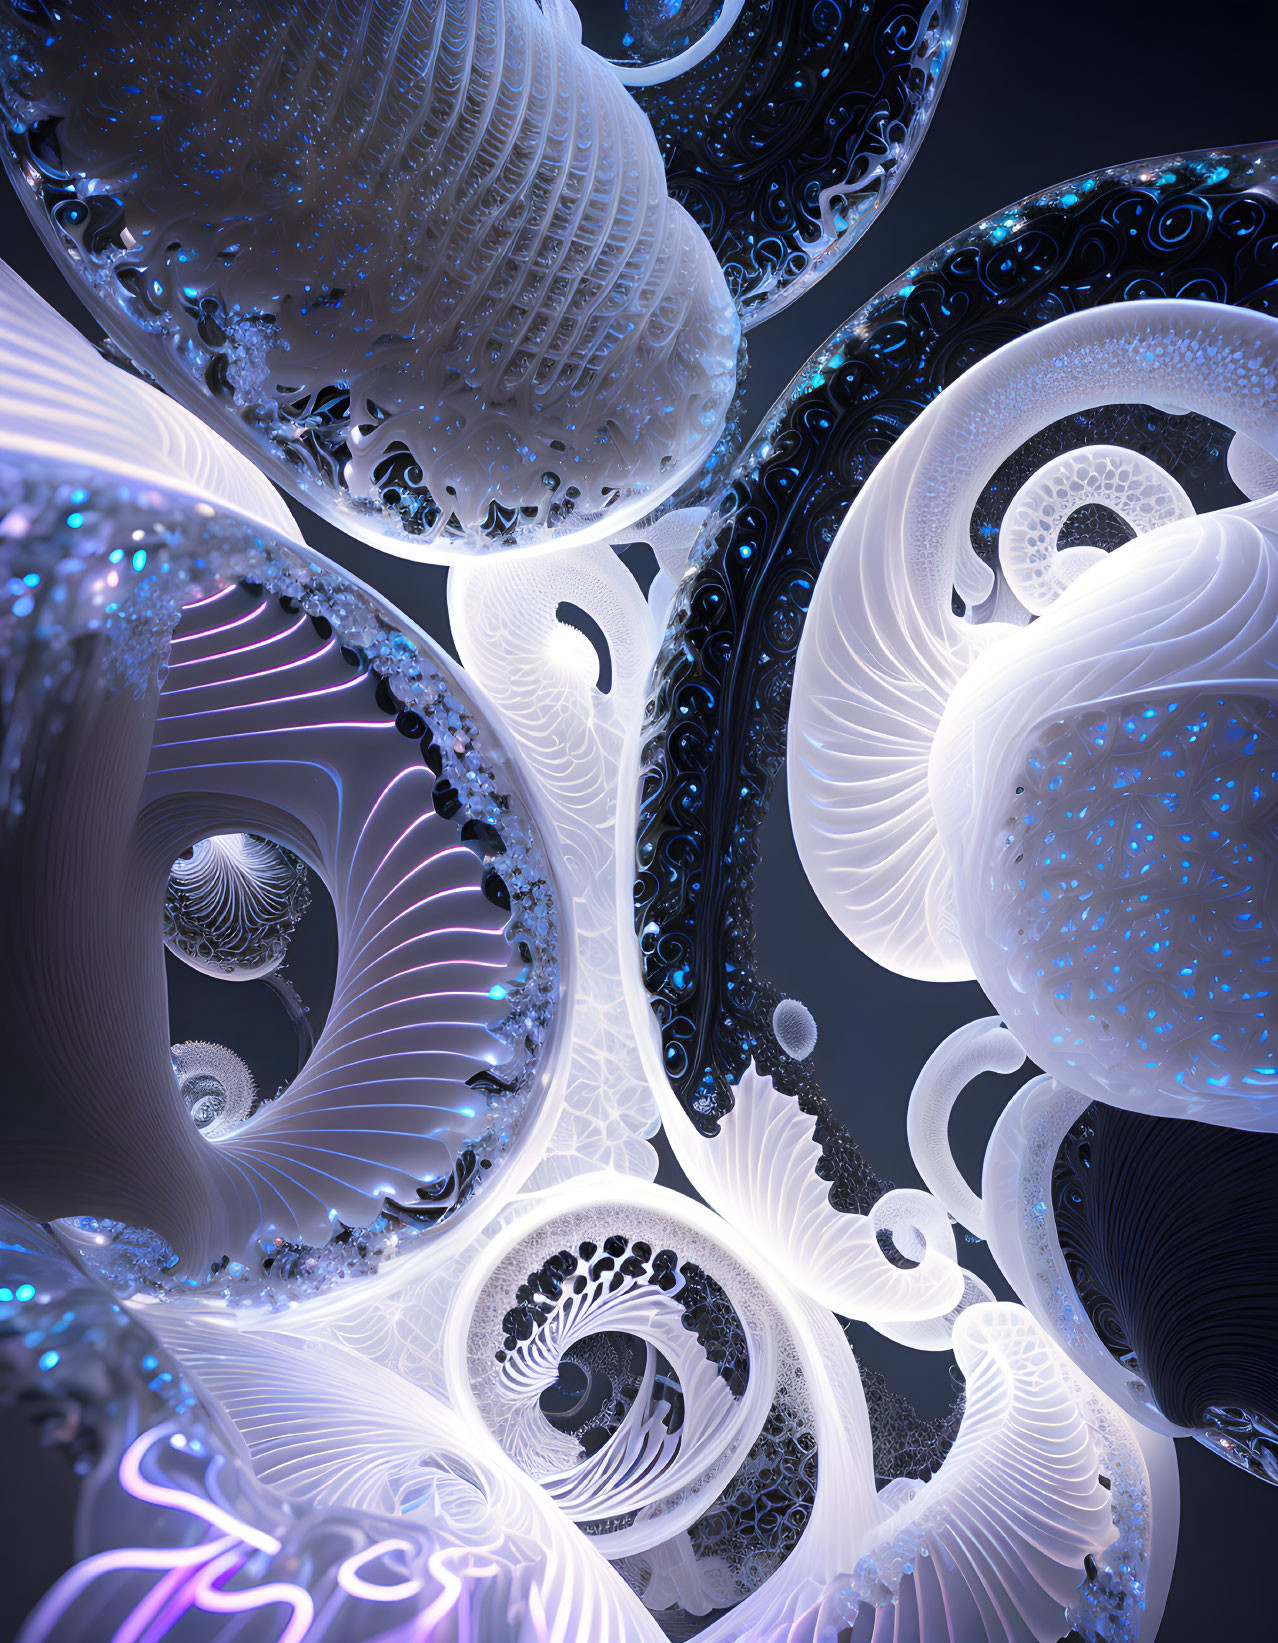 Intricate White and Blue Fractal Art with Spiral Patterns